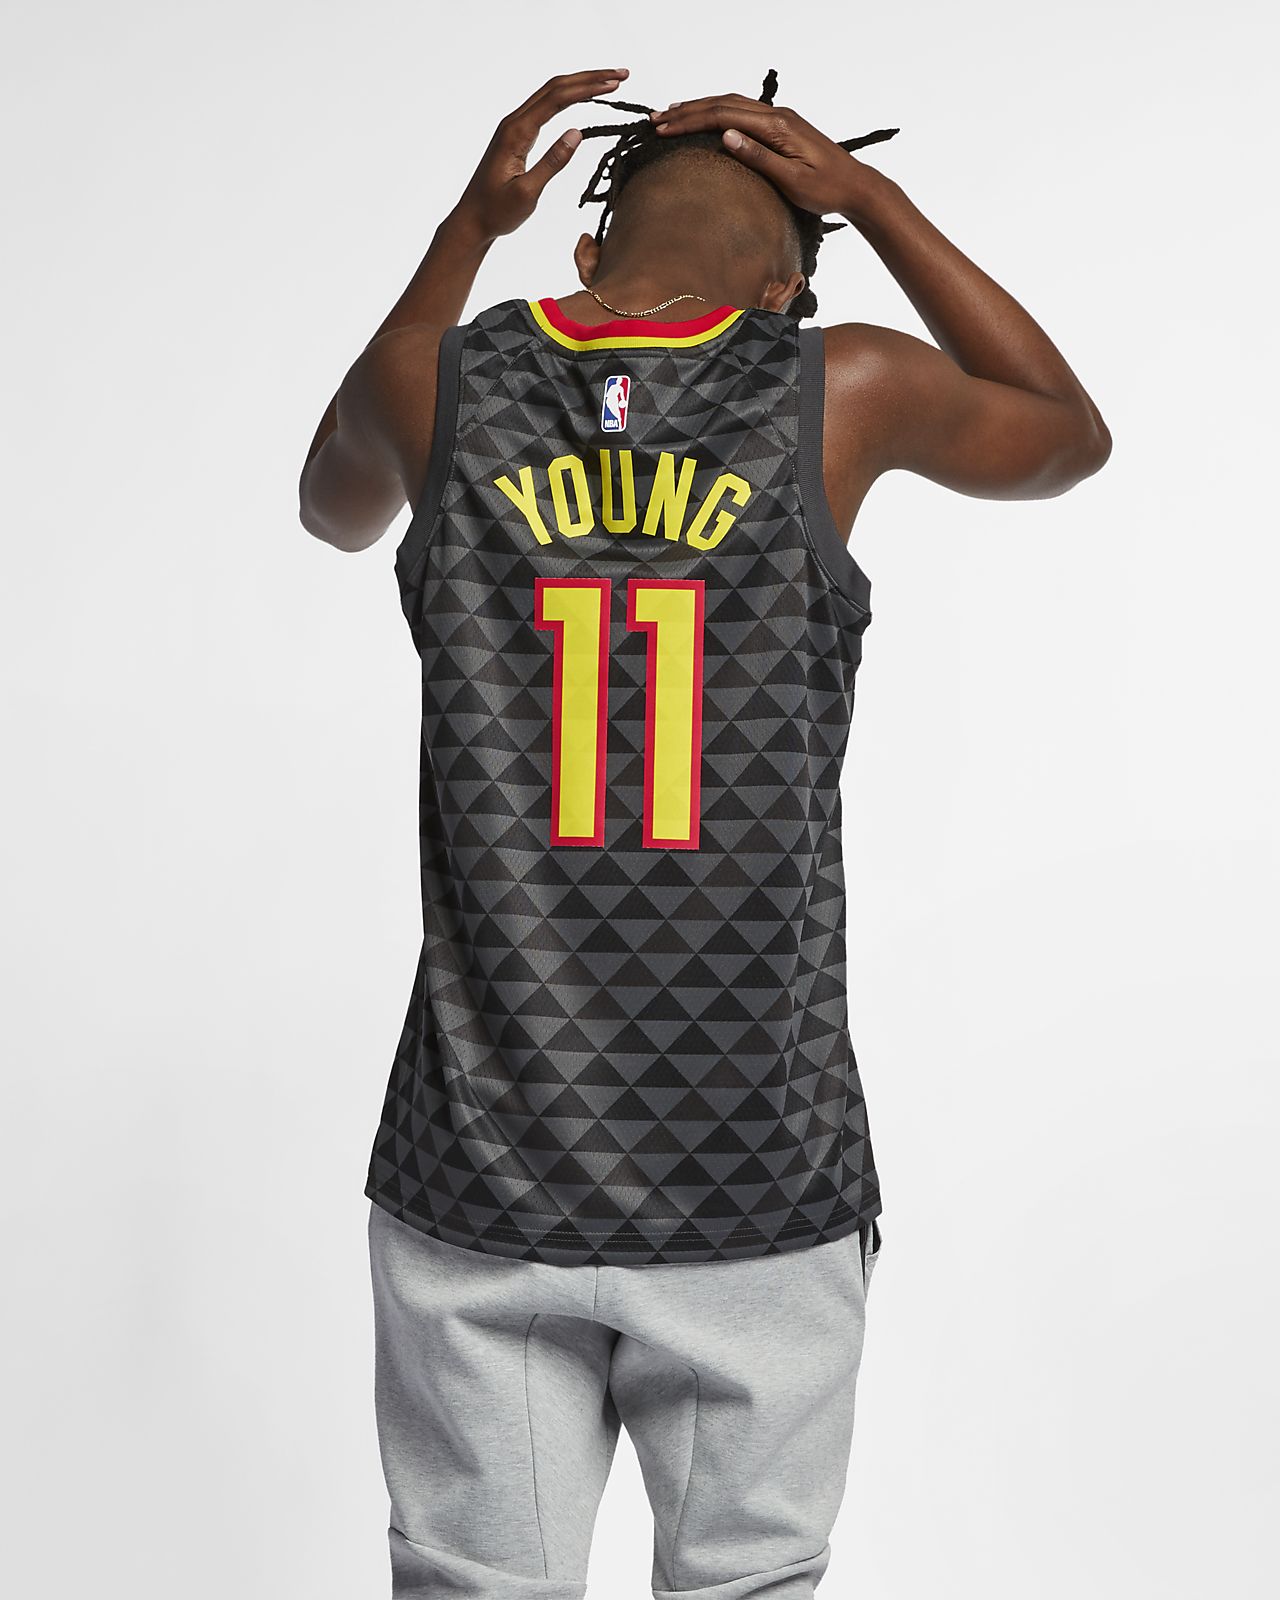 Trae Young Jersey : Authentic Trae Young Atlanta Hawks Peachtree Jersey ...